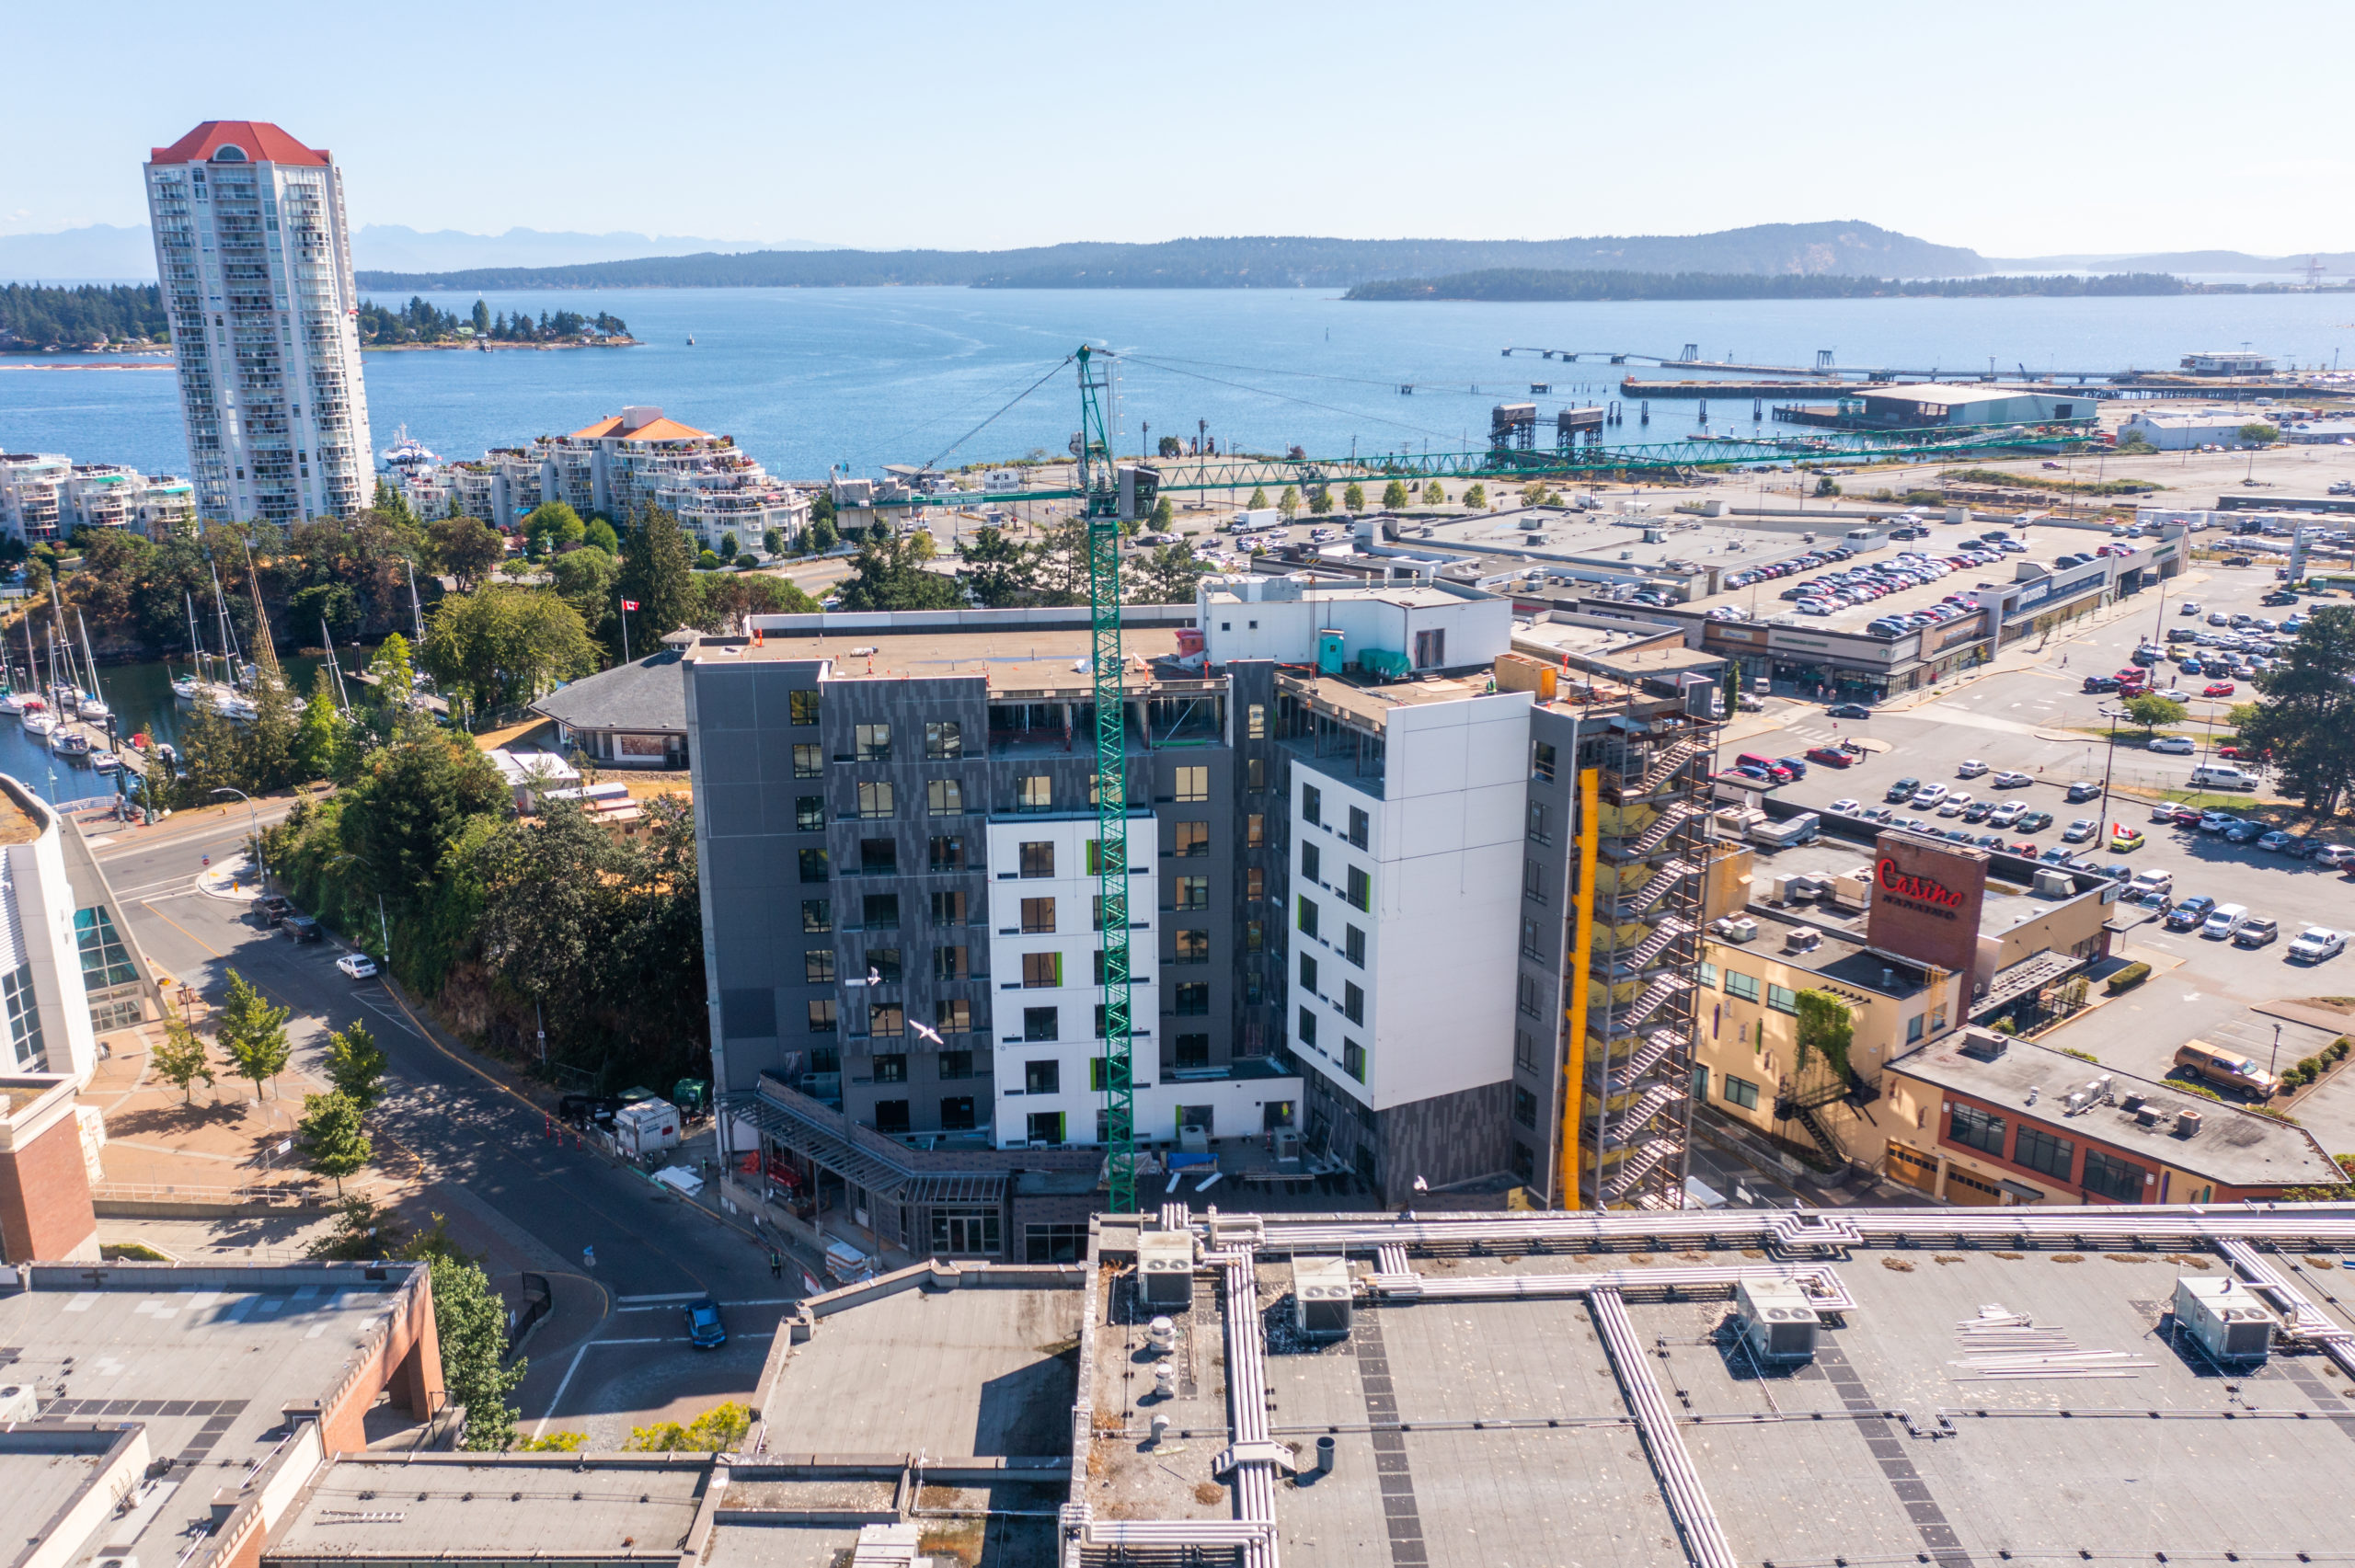 Courtyard Marriott in Nanaimo under construction